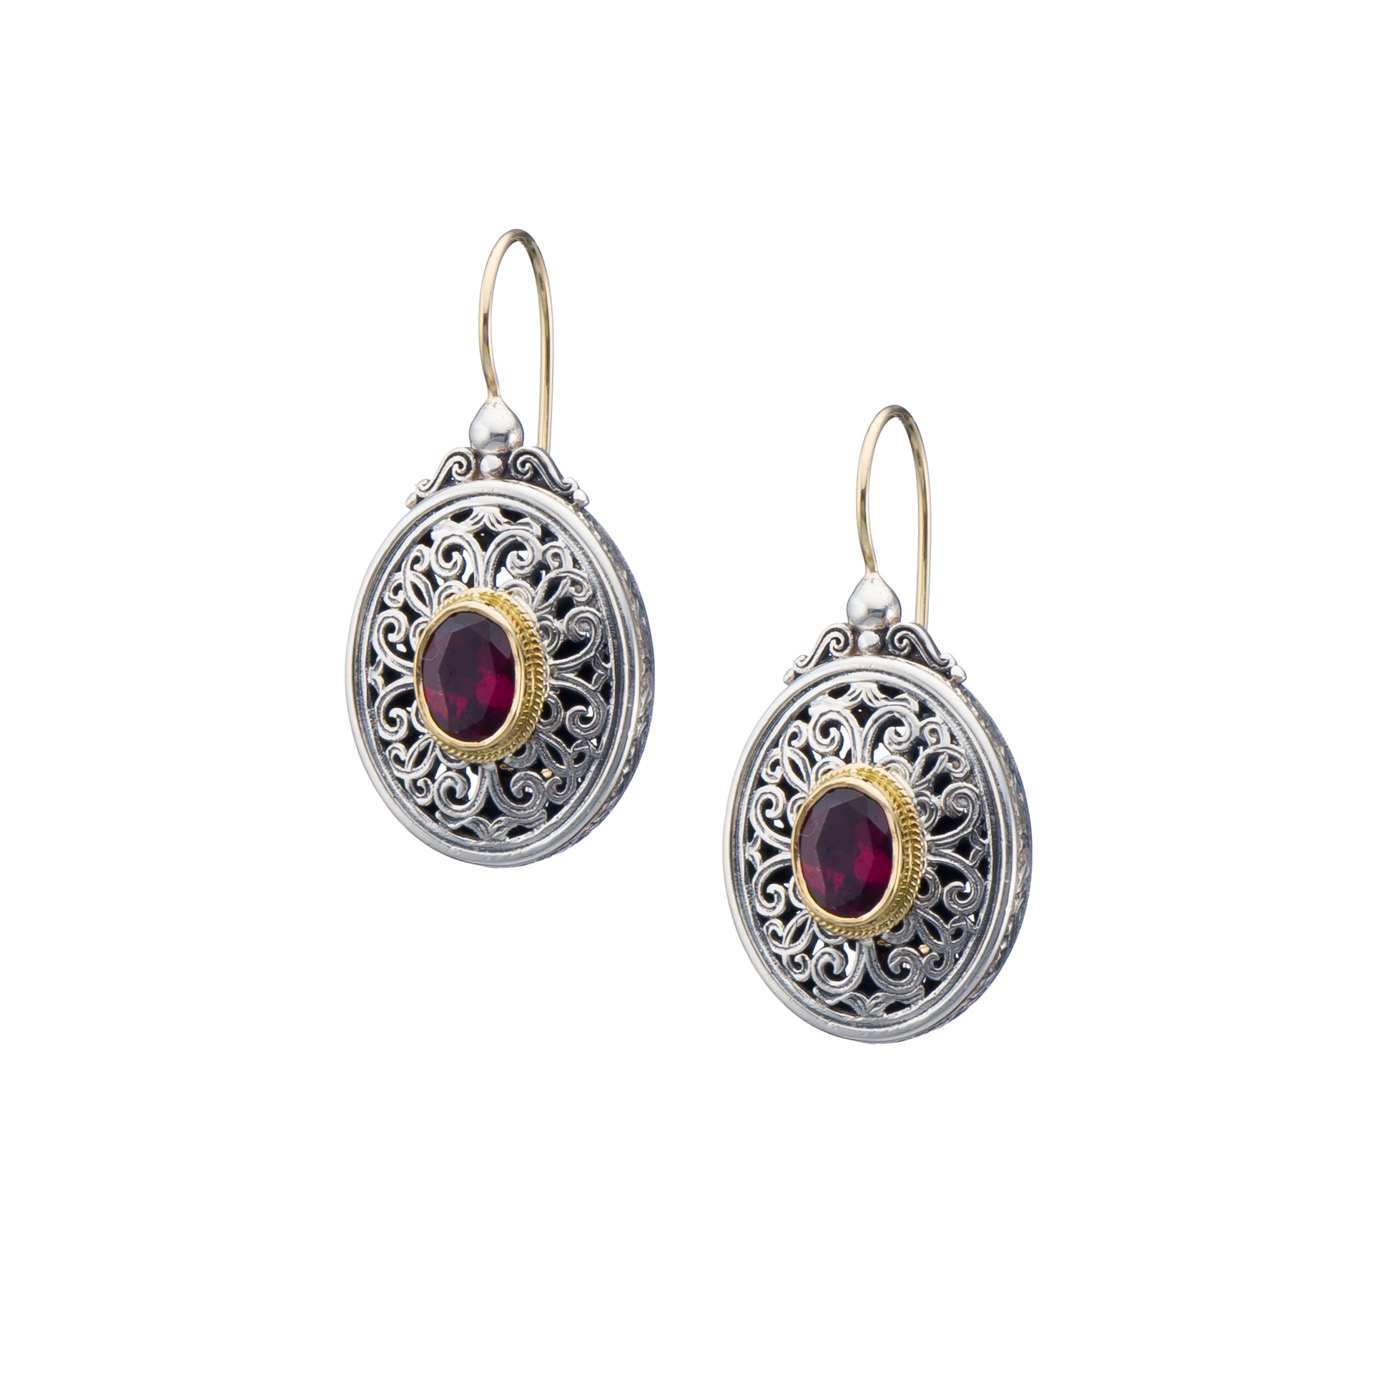 Mediterranean oval earrings in 18K Gold and Sterling Silver with rhodolite